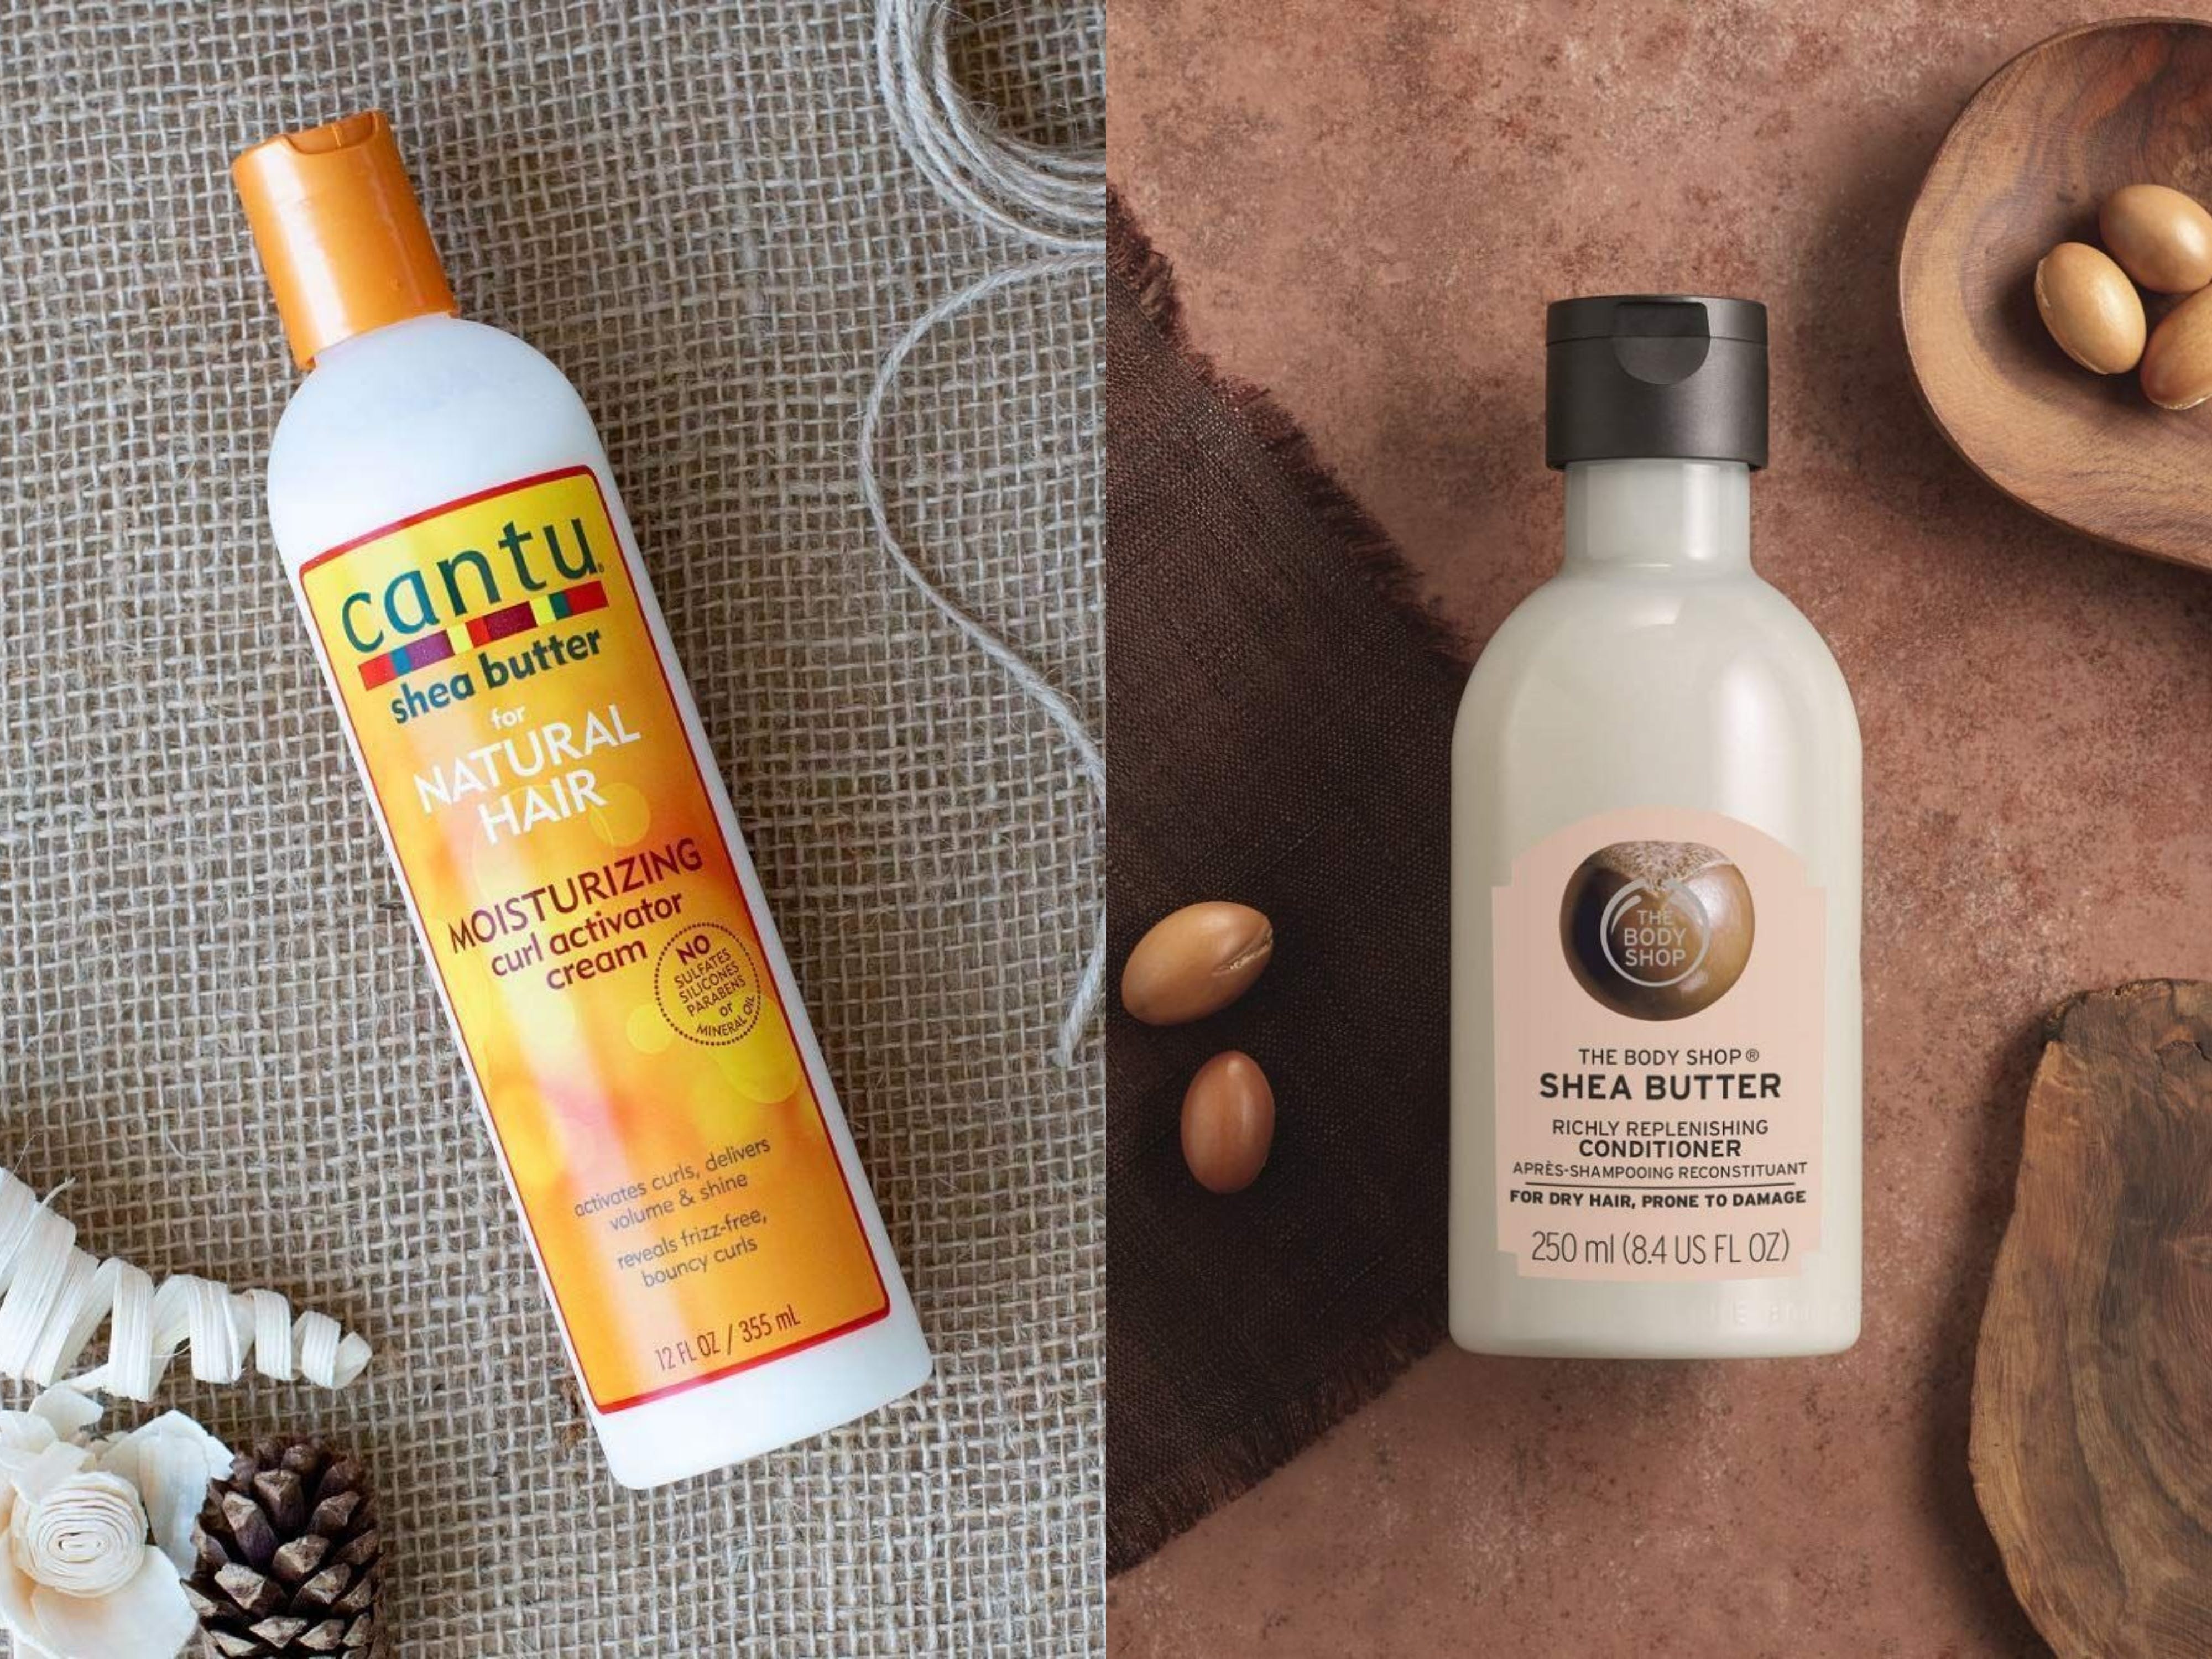 Curly Blonde Hair: The Best Products for Styling and Maintaining - wide 10